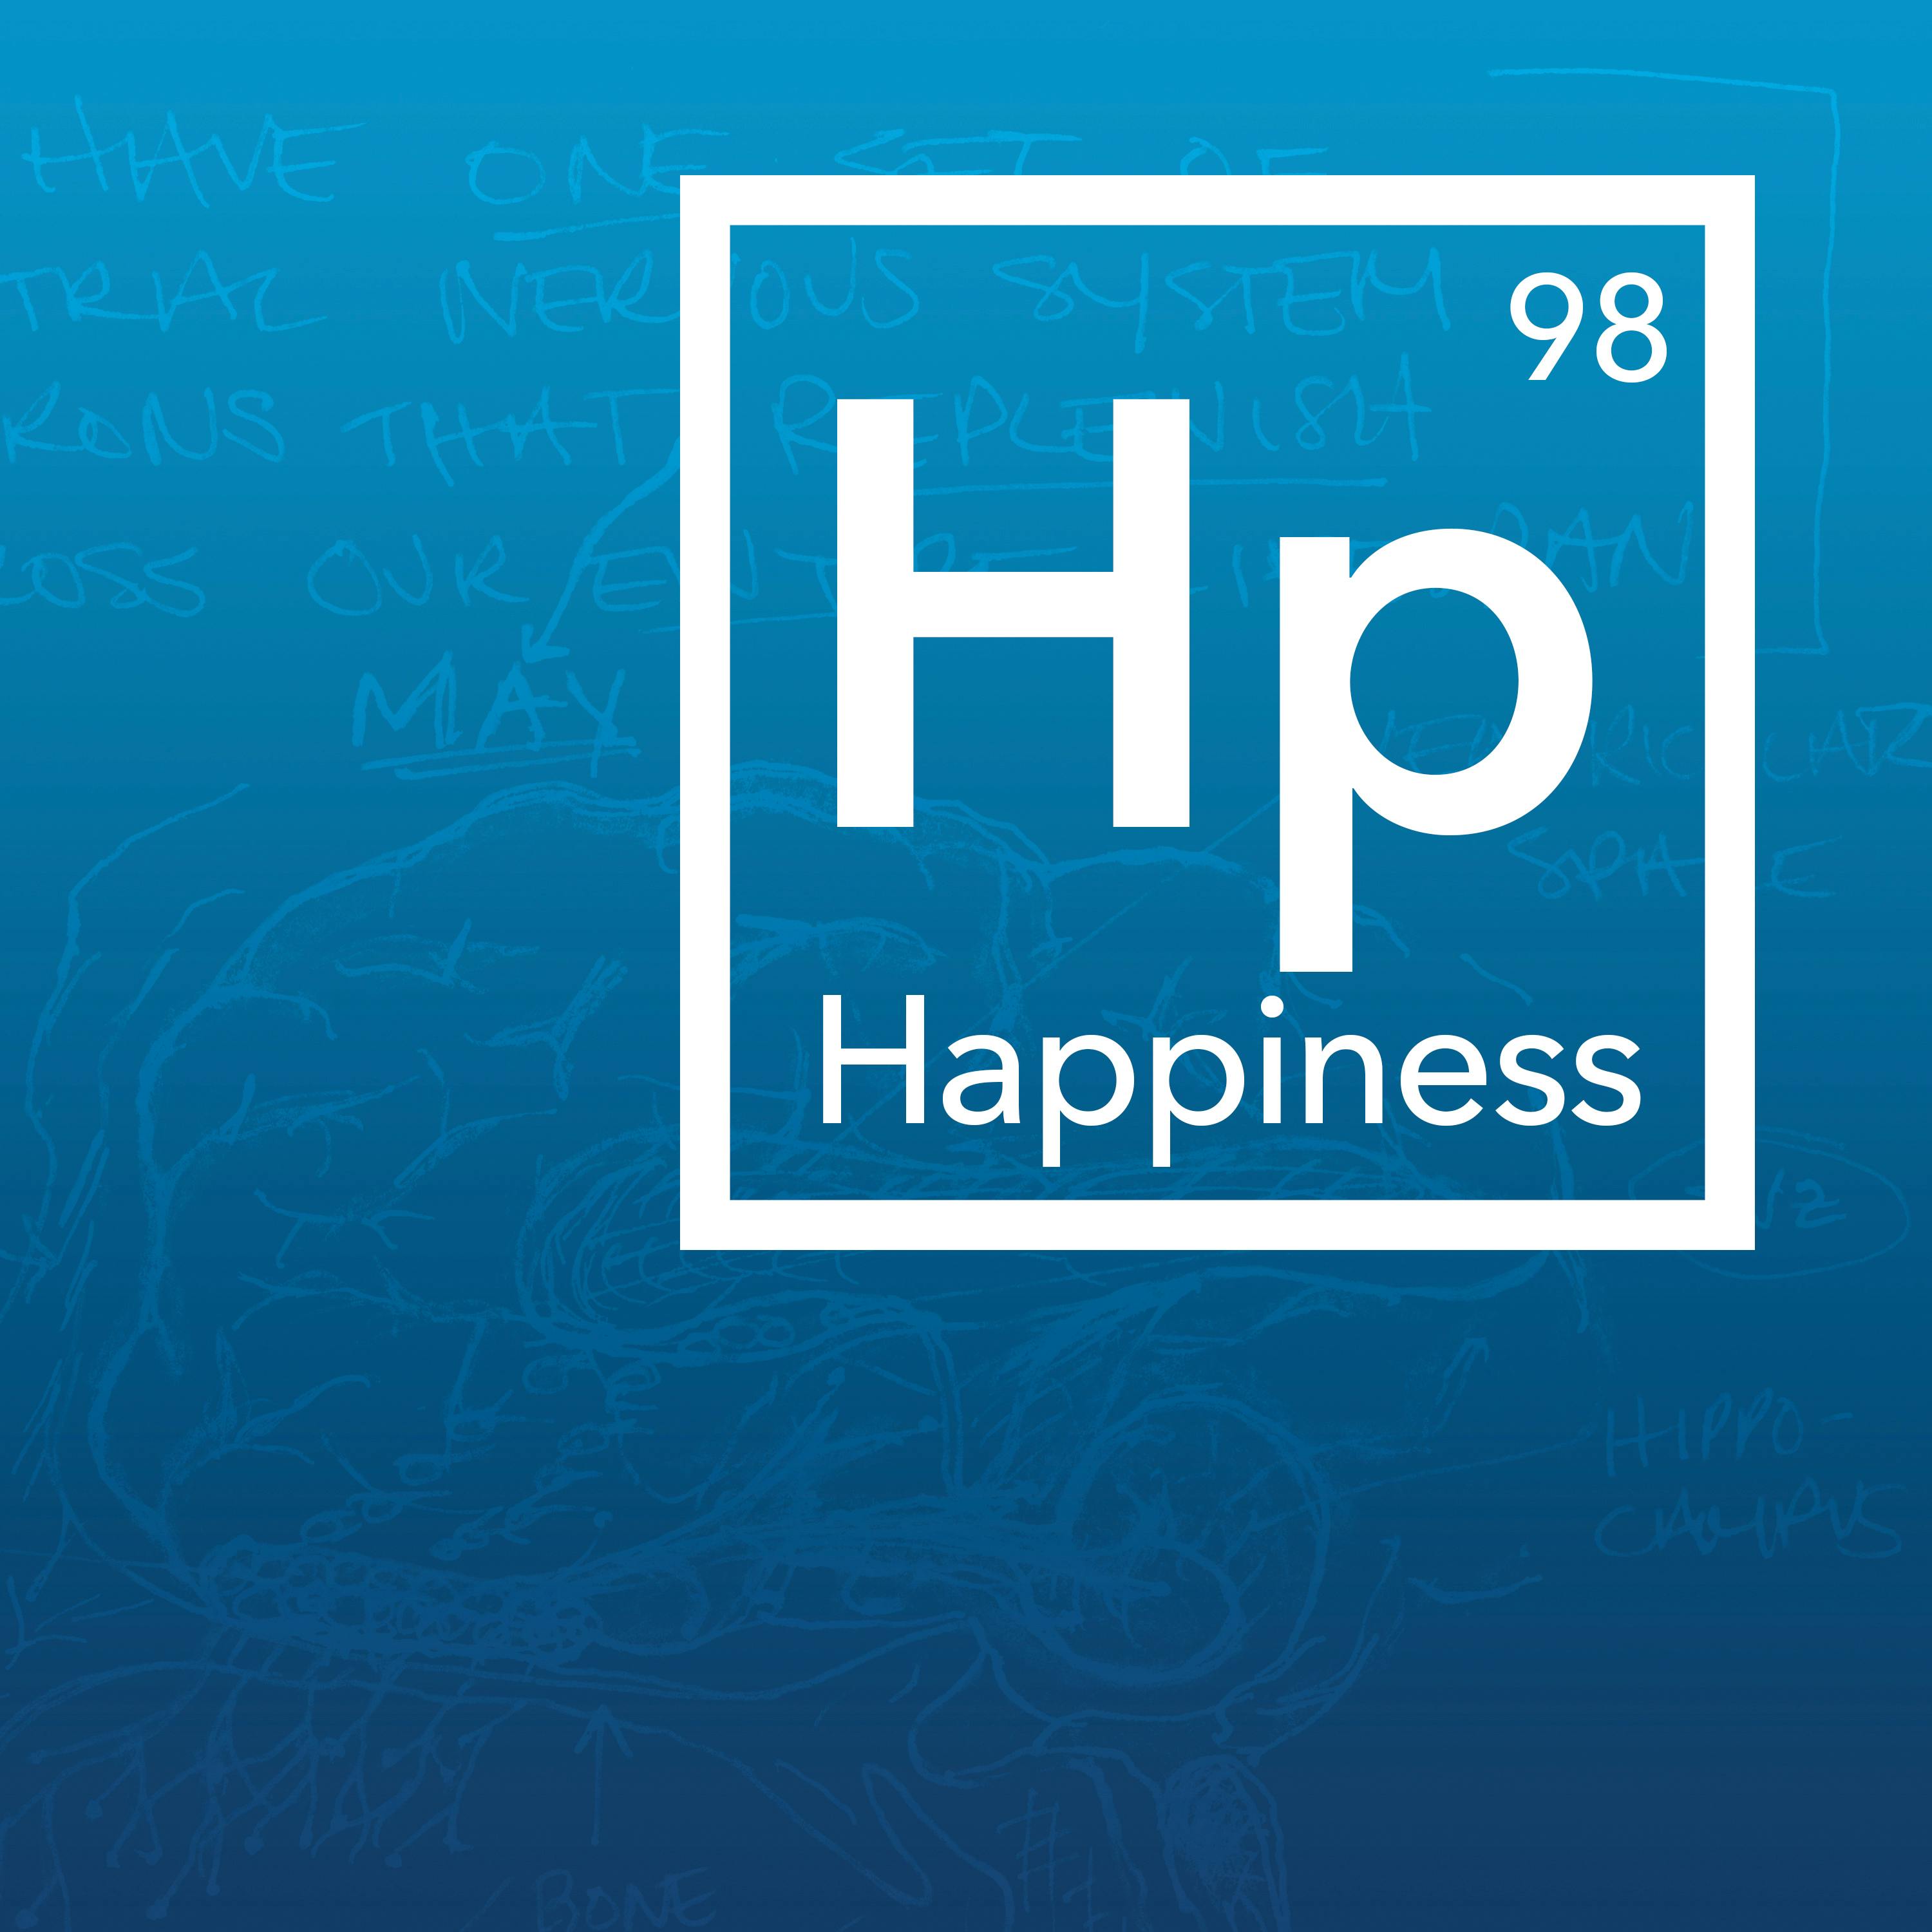 Science-Based Tools for Increasing Happiness  by Scicomm Media